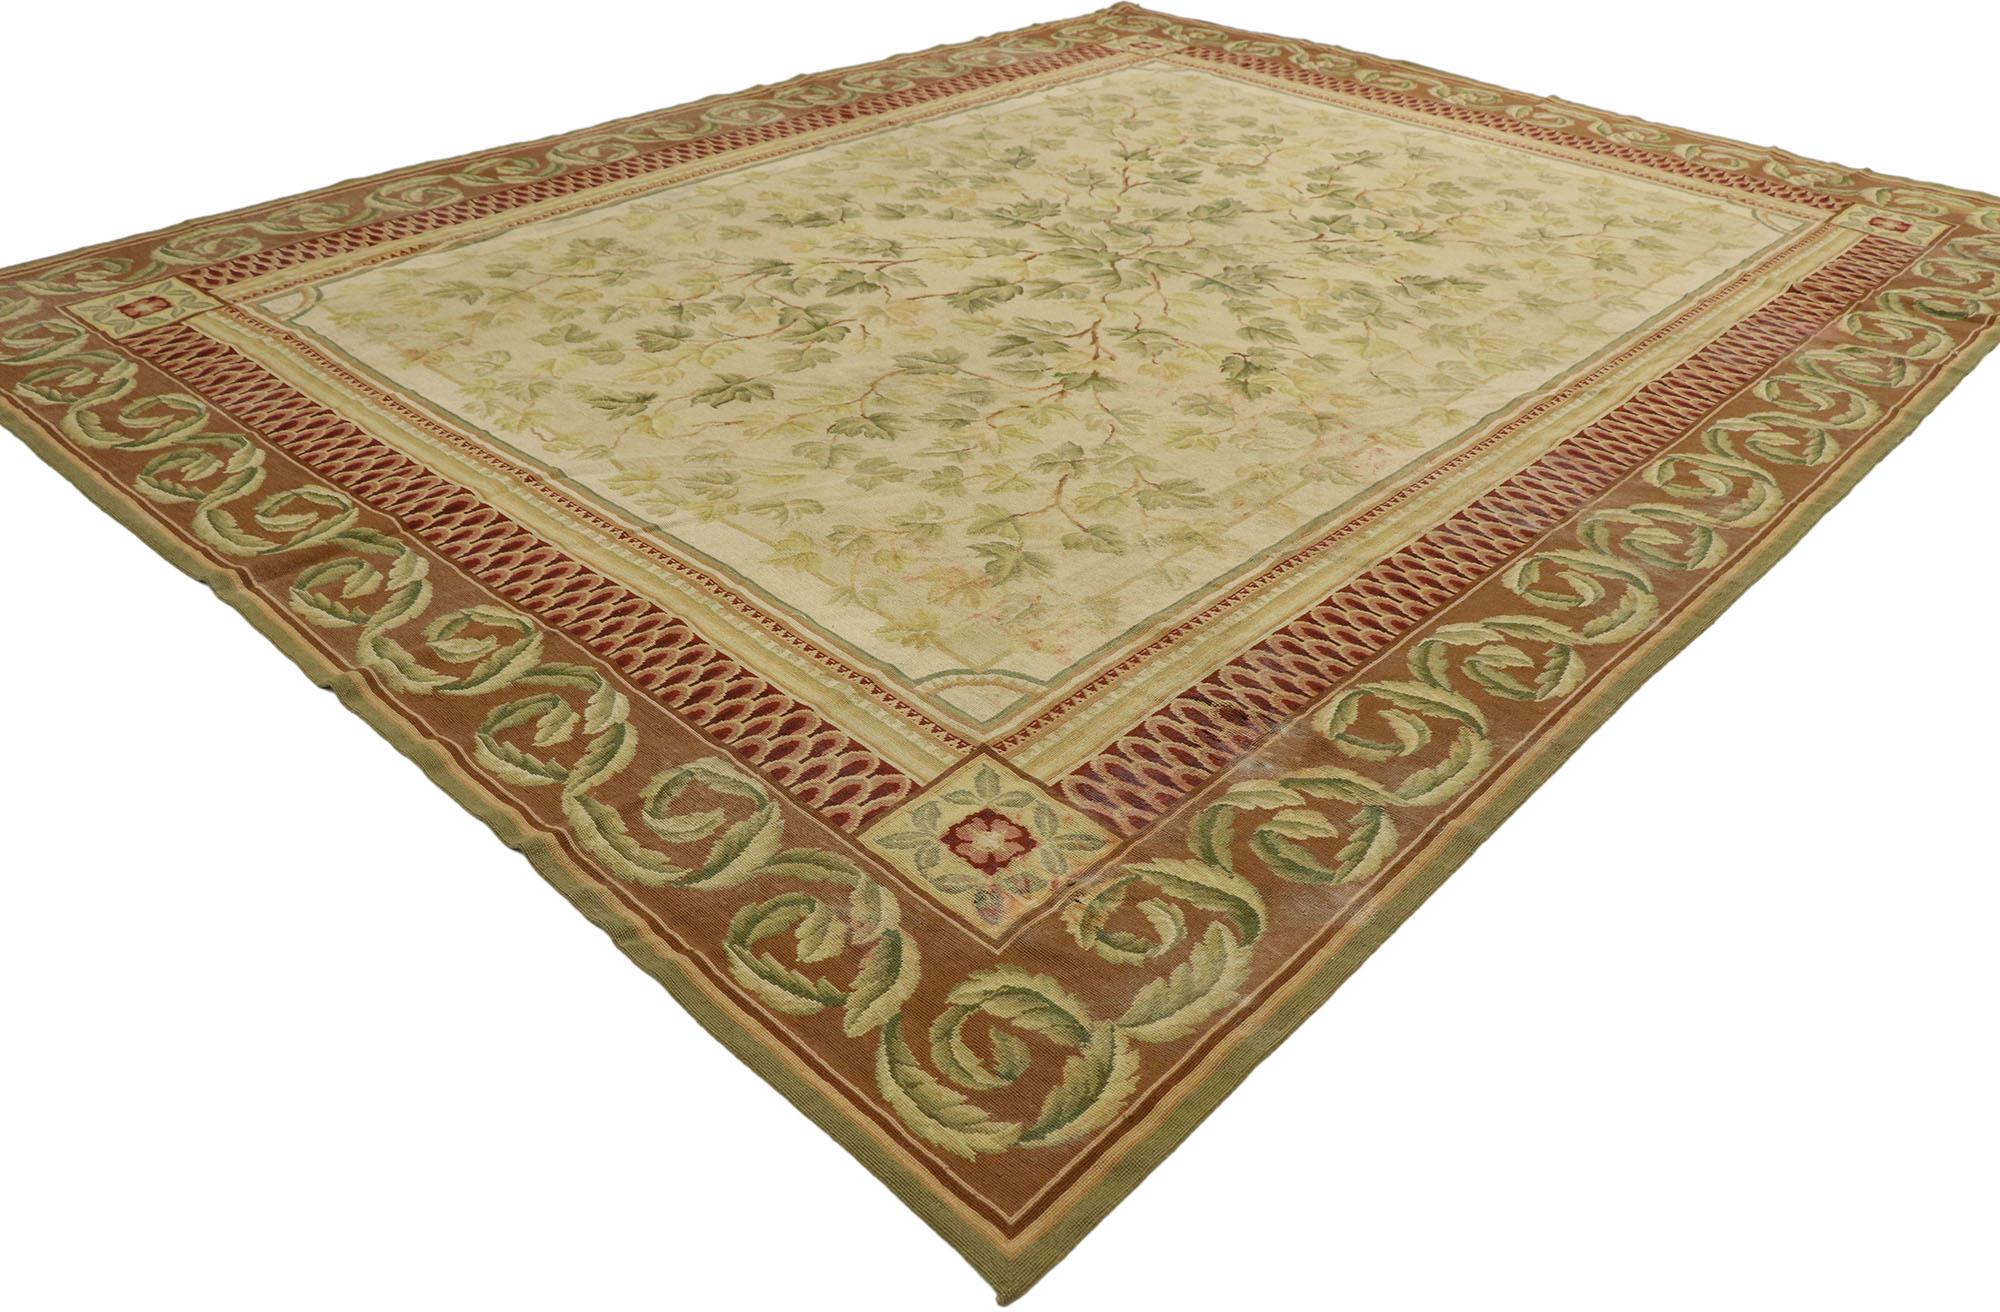 77523, vintage Chinese needlepoint Aubusson style rug with English Cottage style. Balancing a timeless design with traditional sensibility, this hand-woven wool vintage Chinese needlepoint rug beautifully embodies English Cottage style. The abrashed